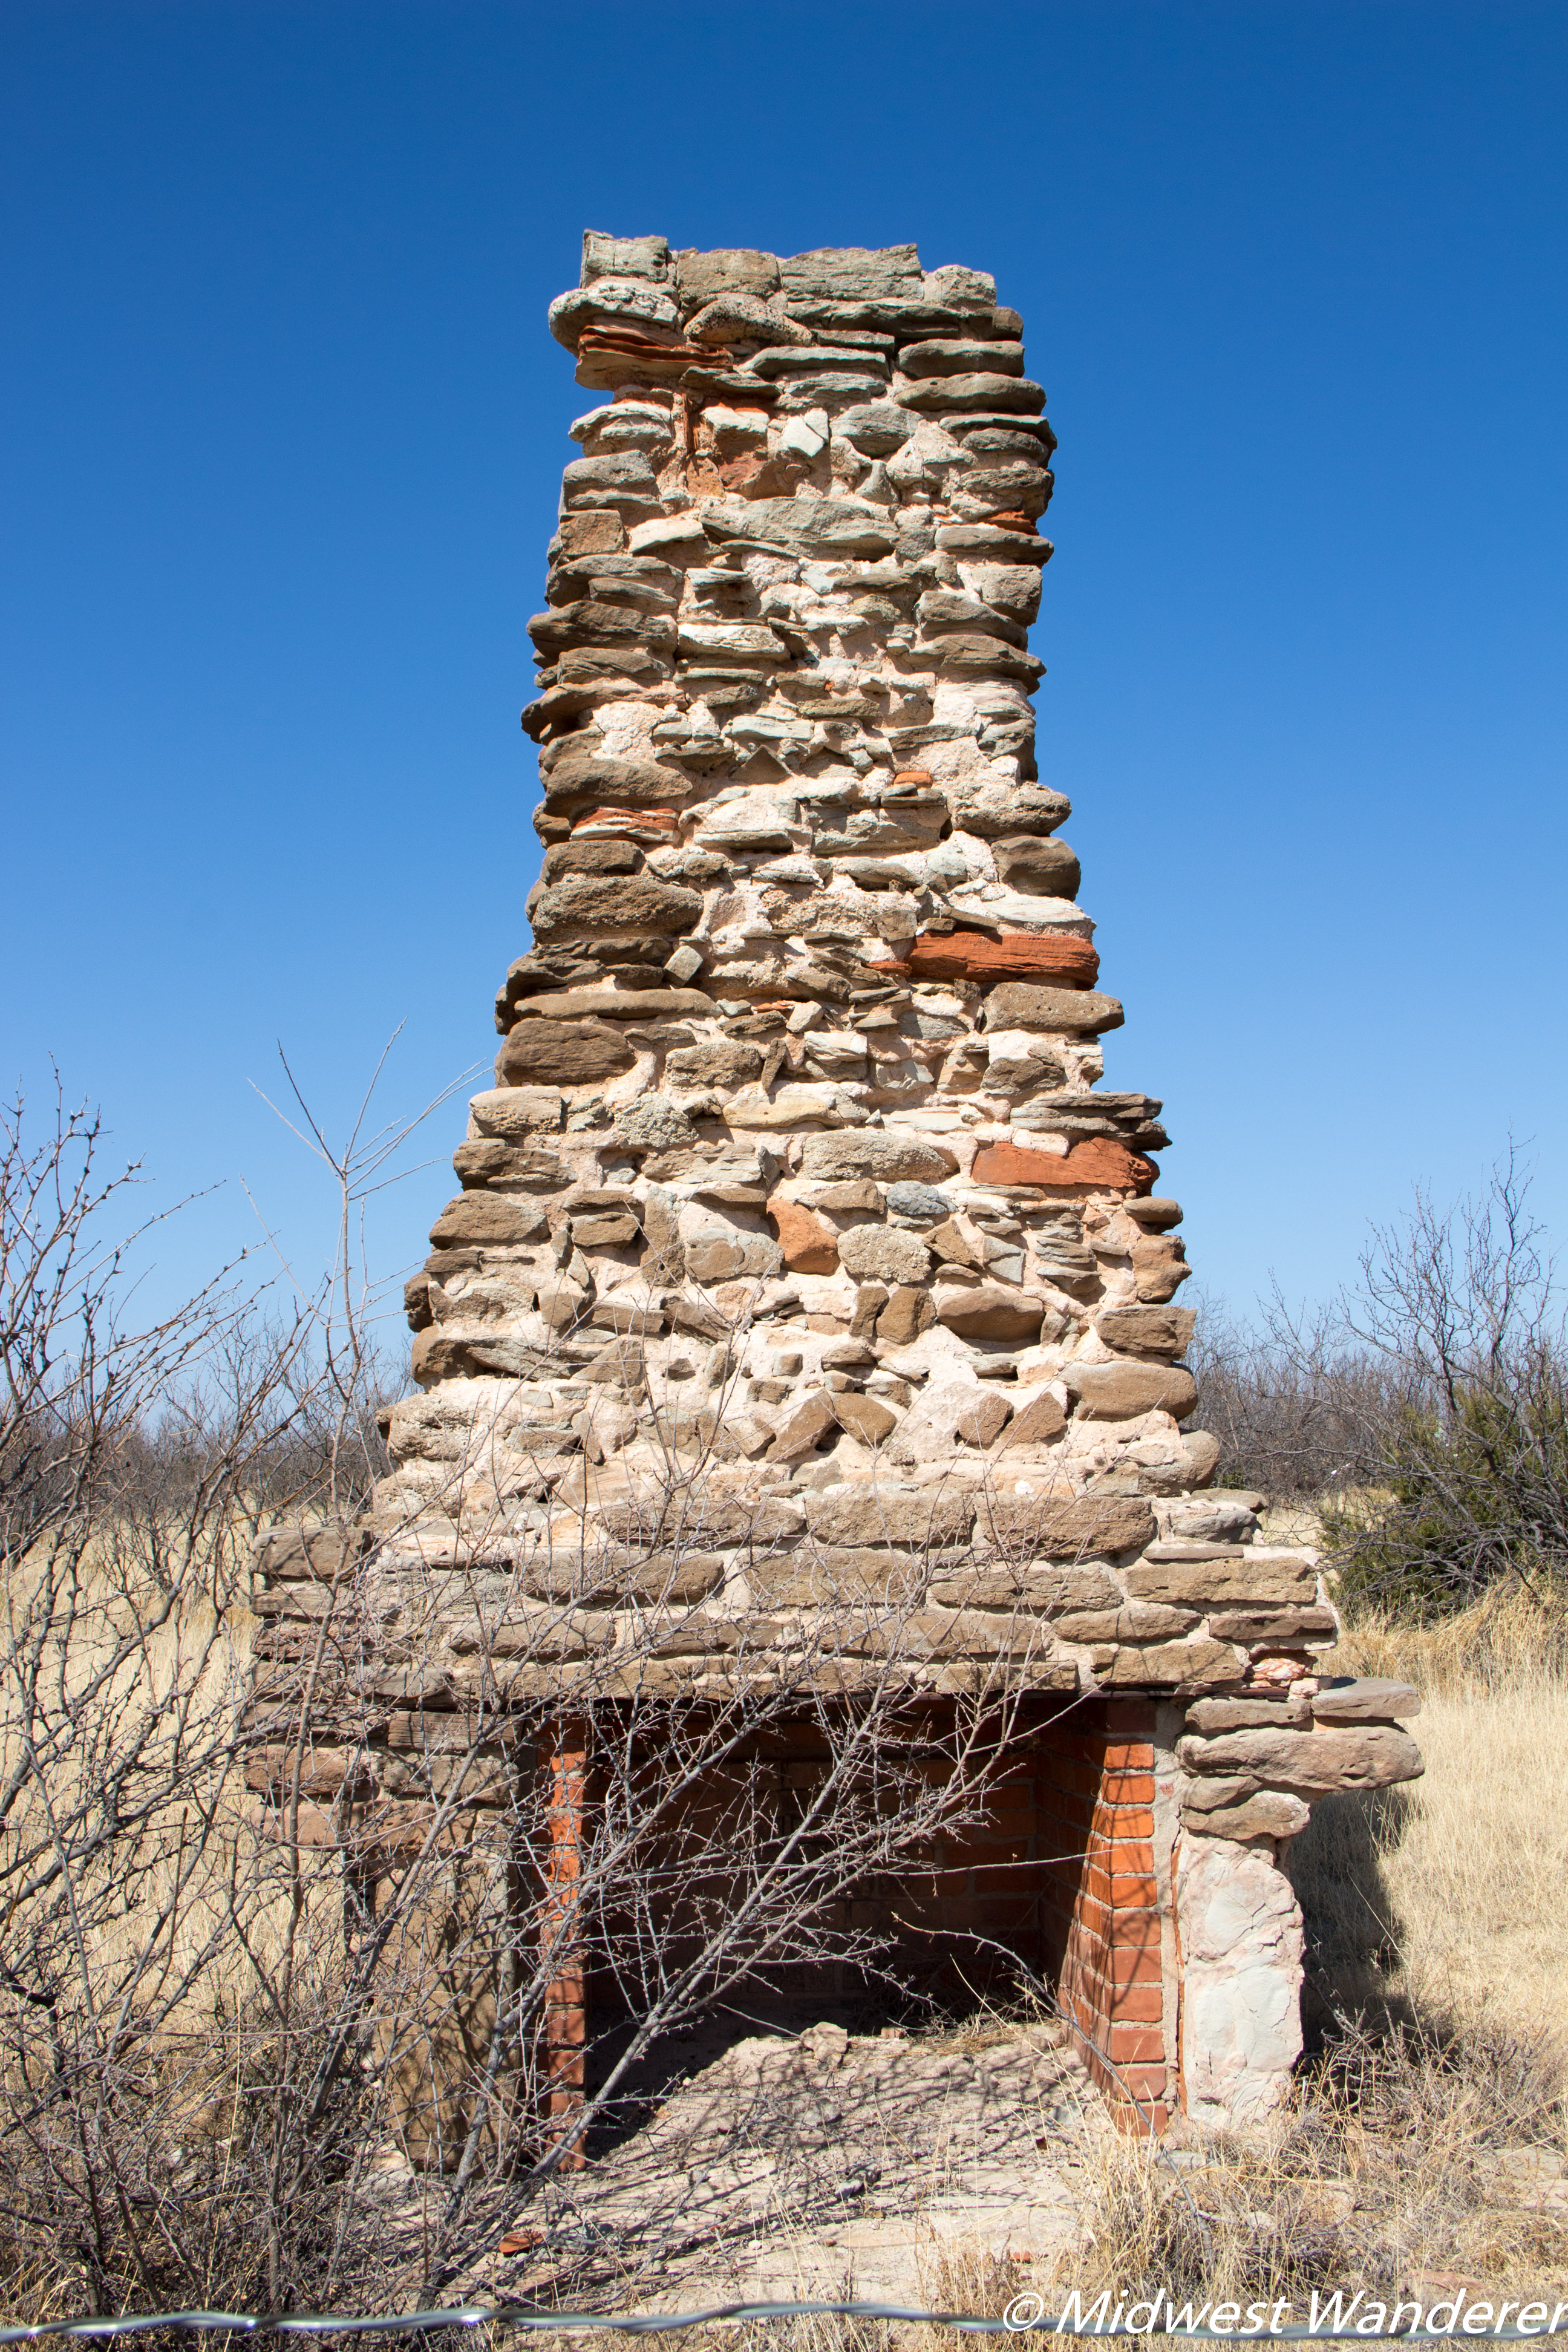 Palo Duro Canyon State Park - remnants of a chimney from the old CCC recreation center